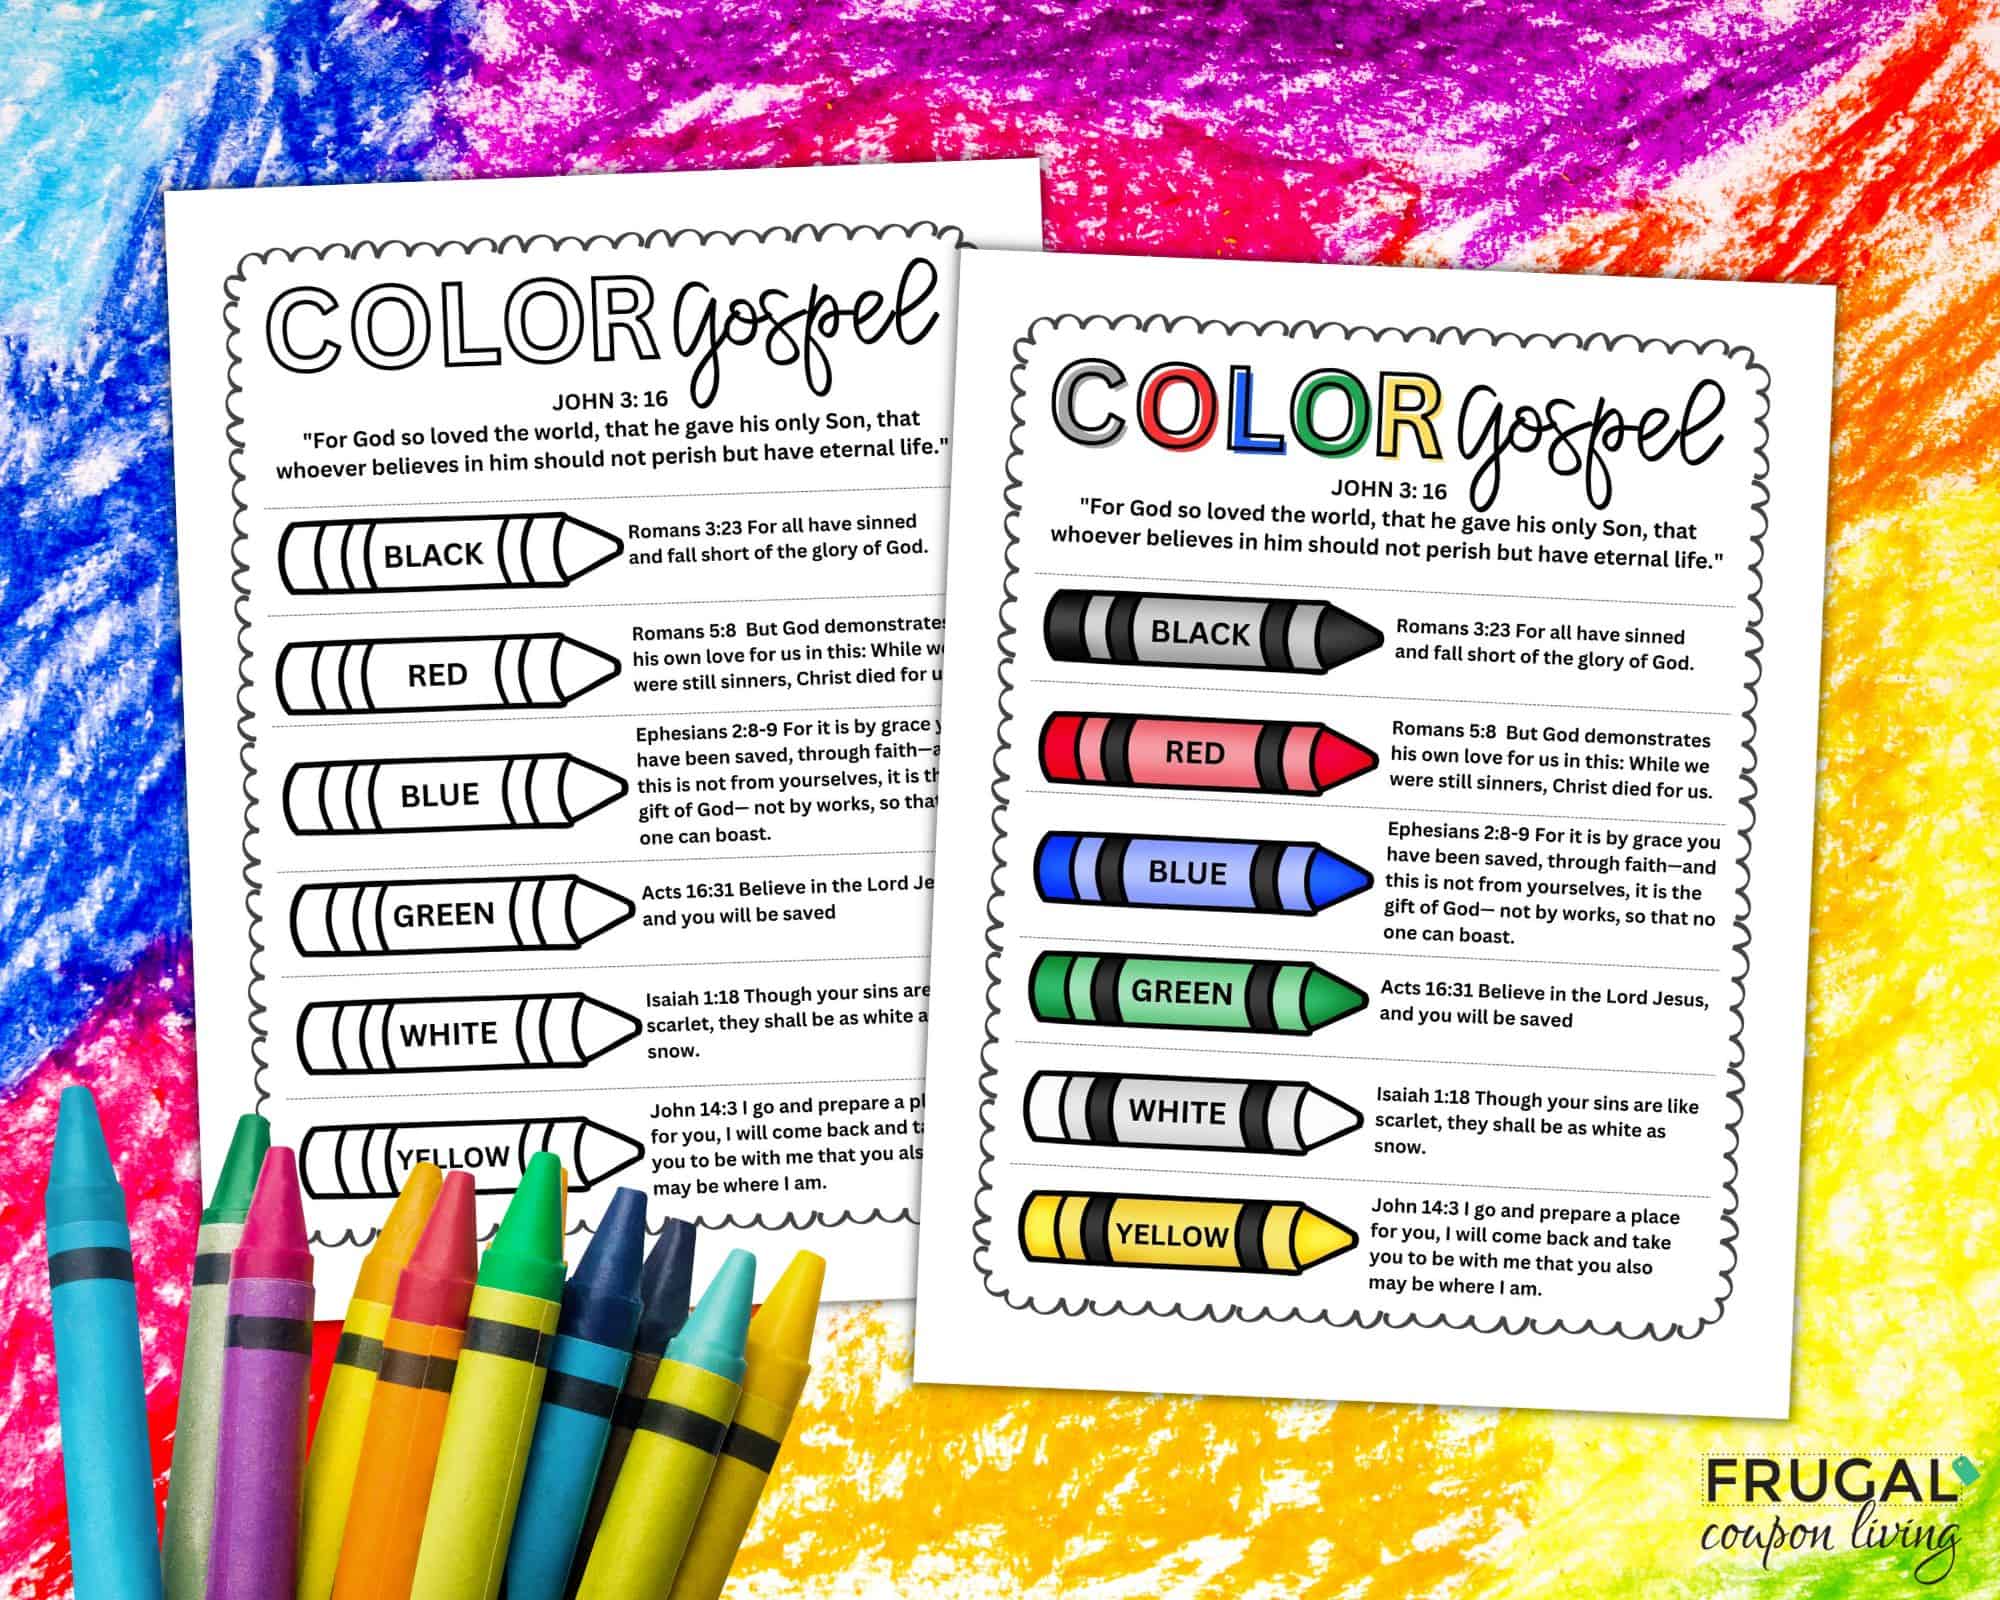 Gospel coloring page for kids